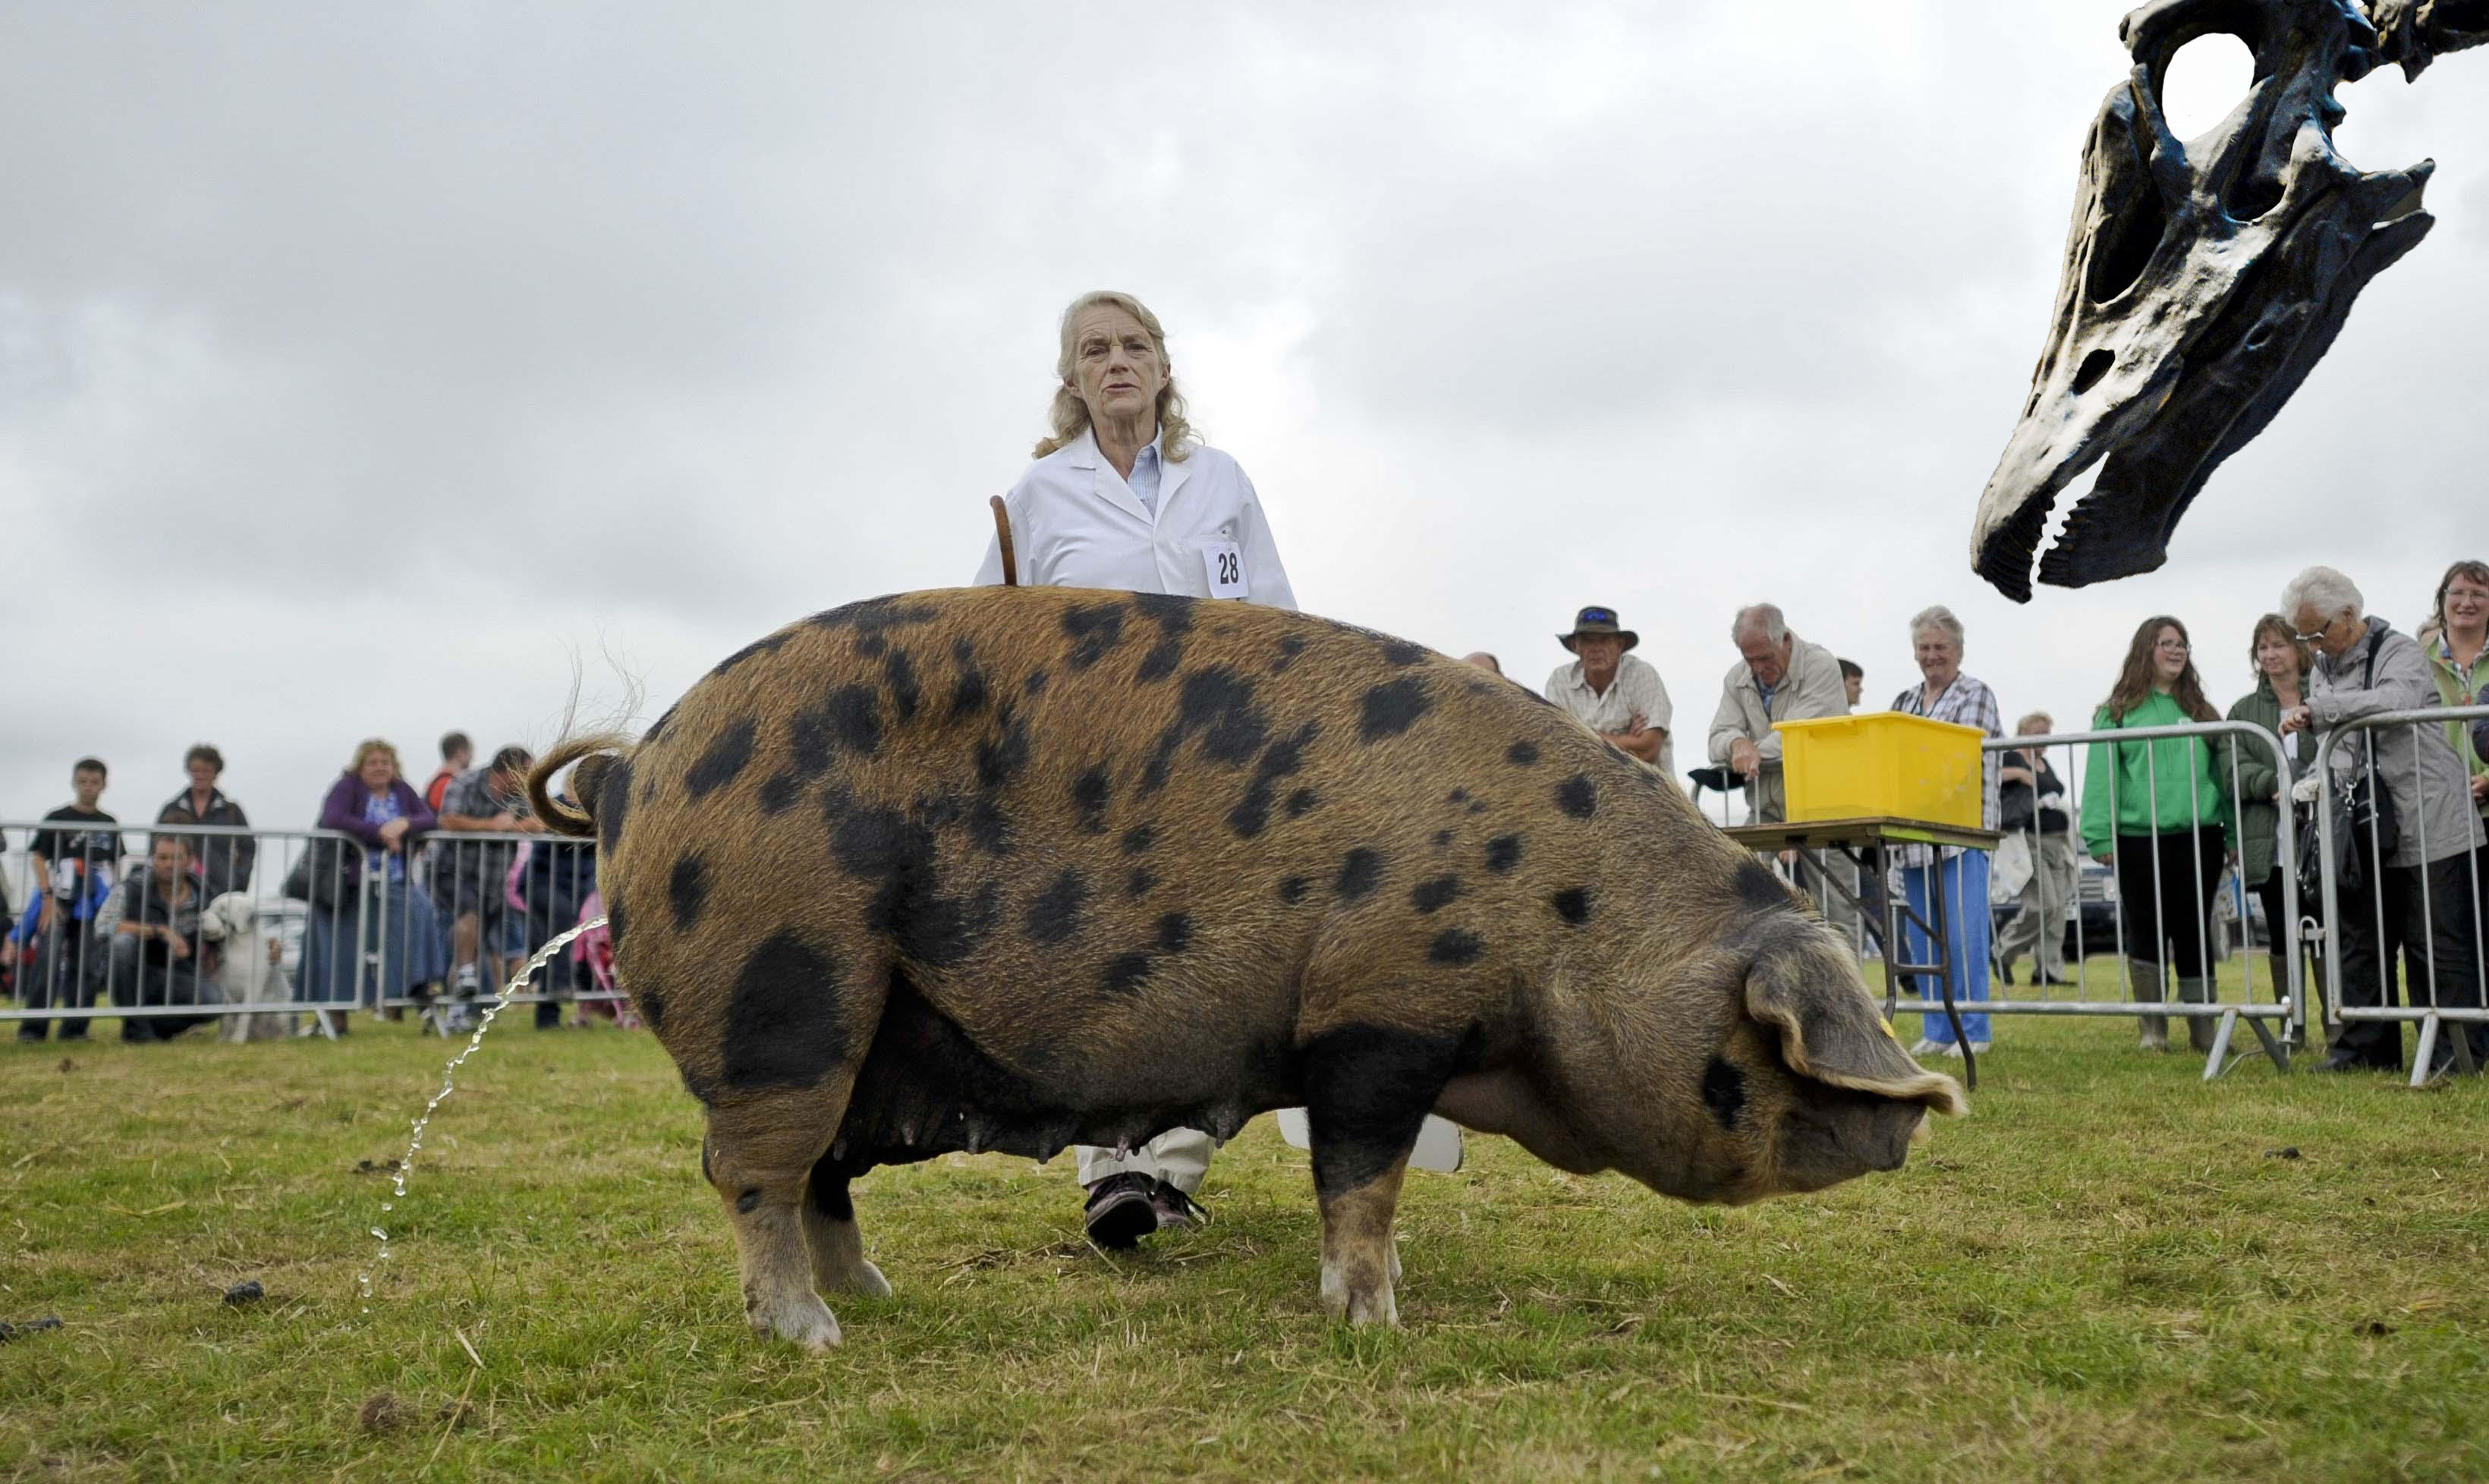 An Oxford Sandy and Black pig urinates as spectaters watch at the Dorset County Show, Dorchester.